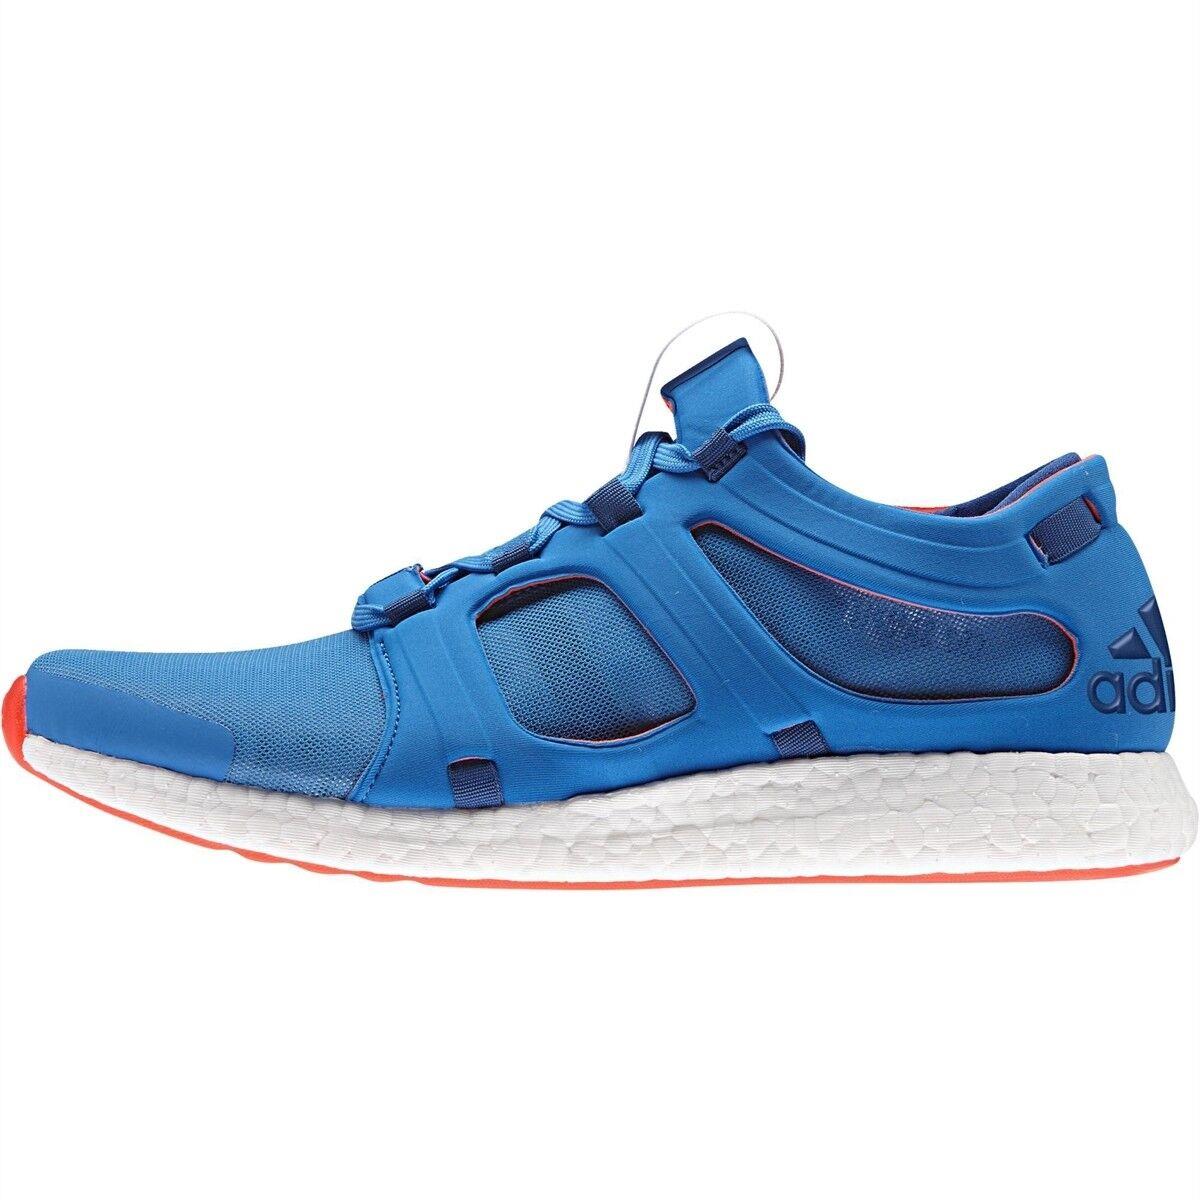 Adidas Men`s Climachill Rocket Athletic Running Shoes Boost Midsole Sneakers Blue